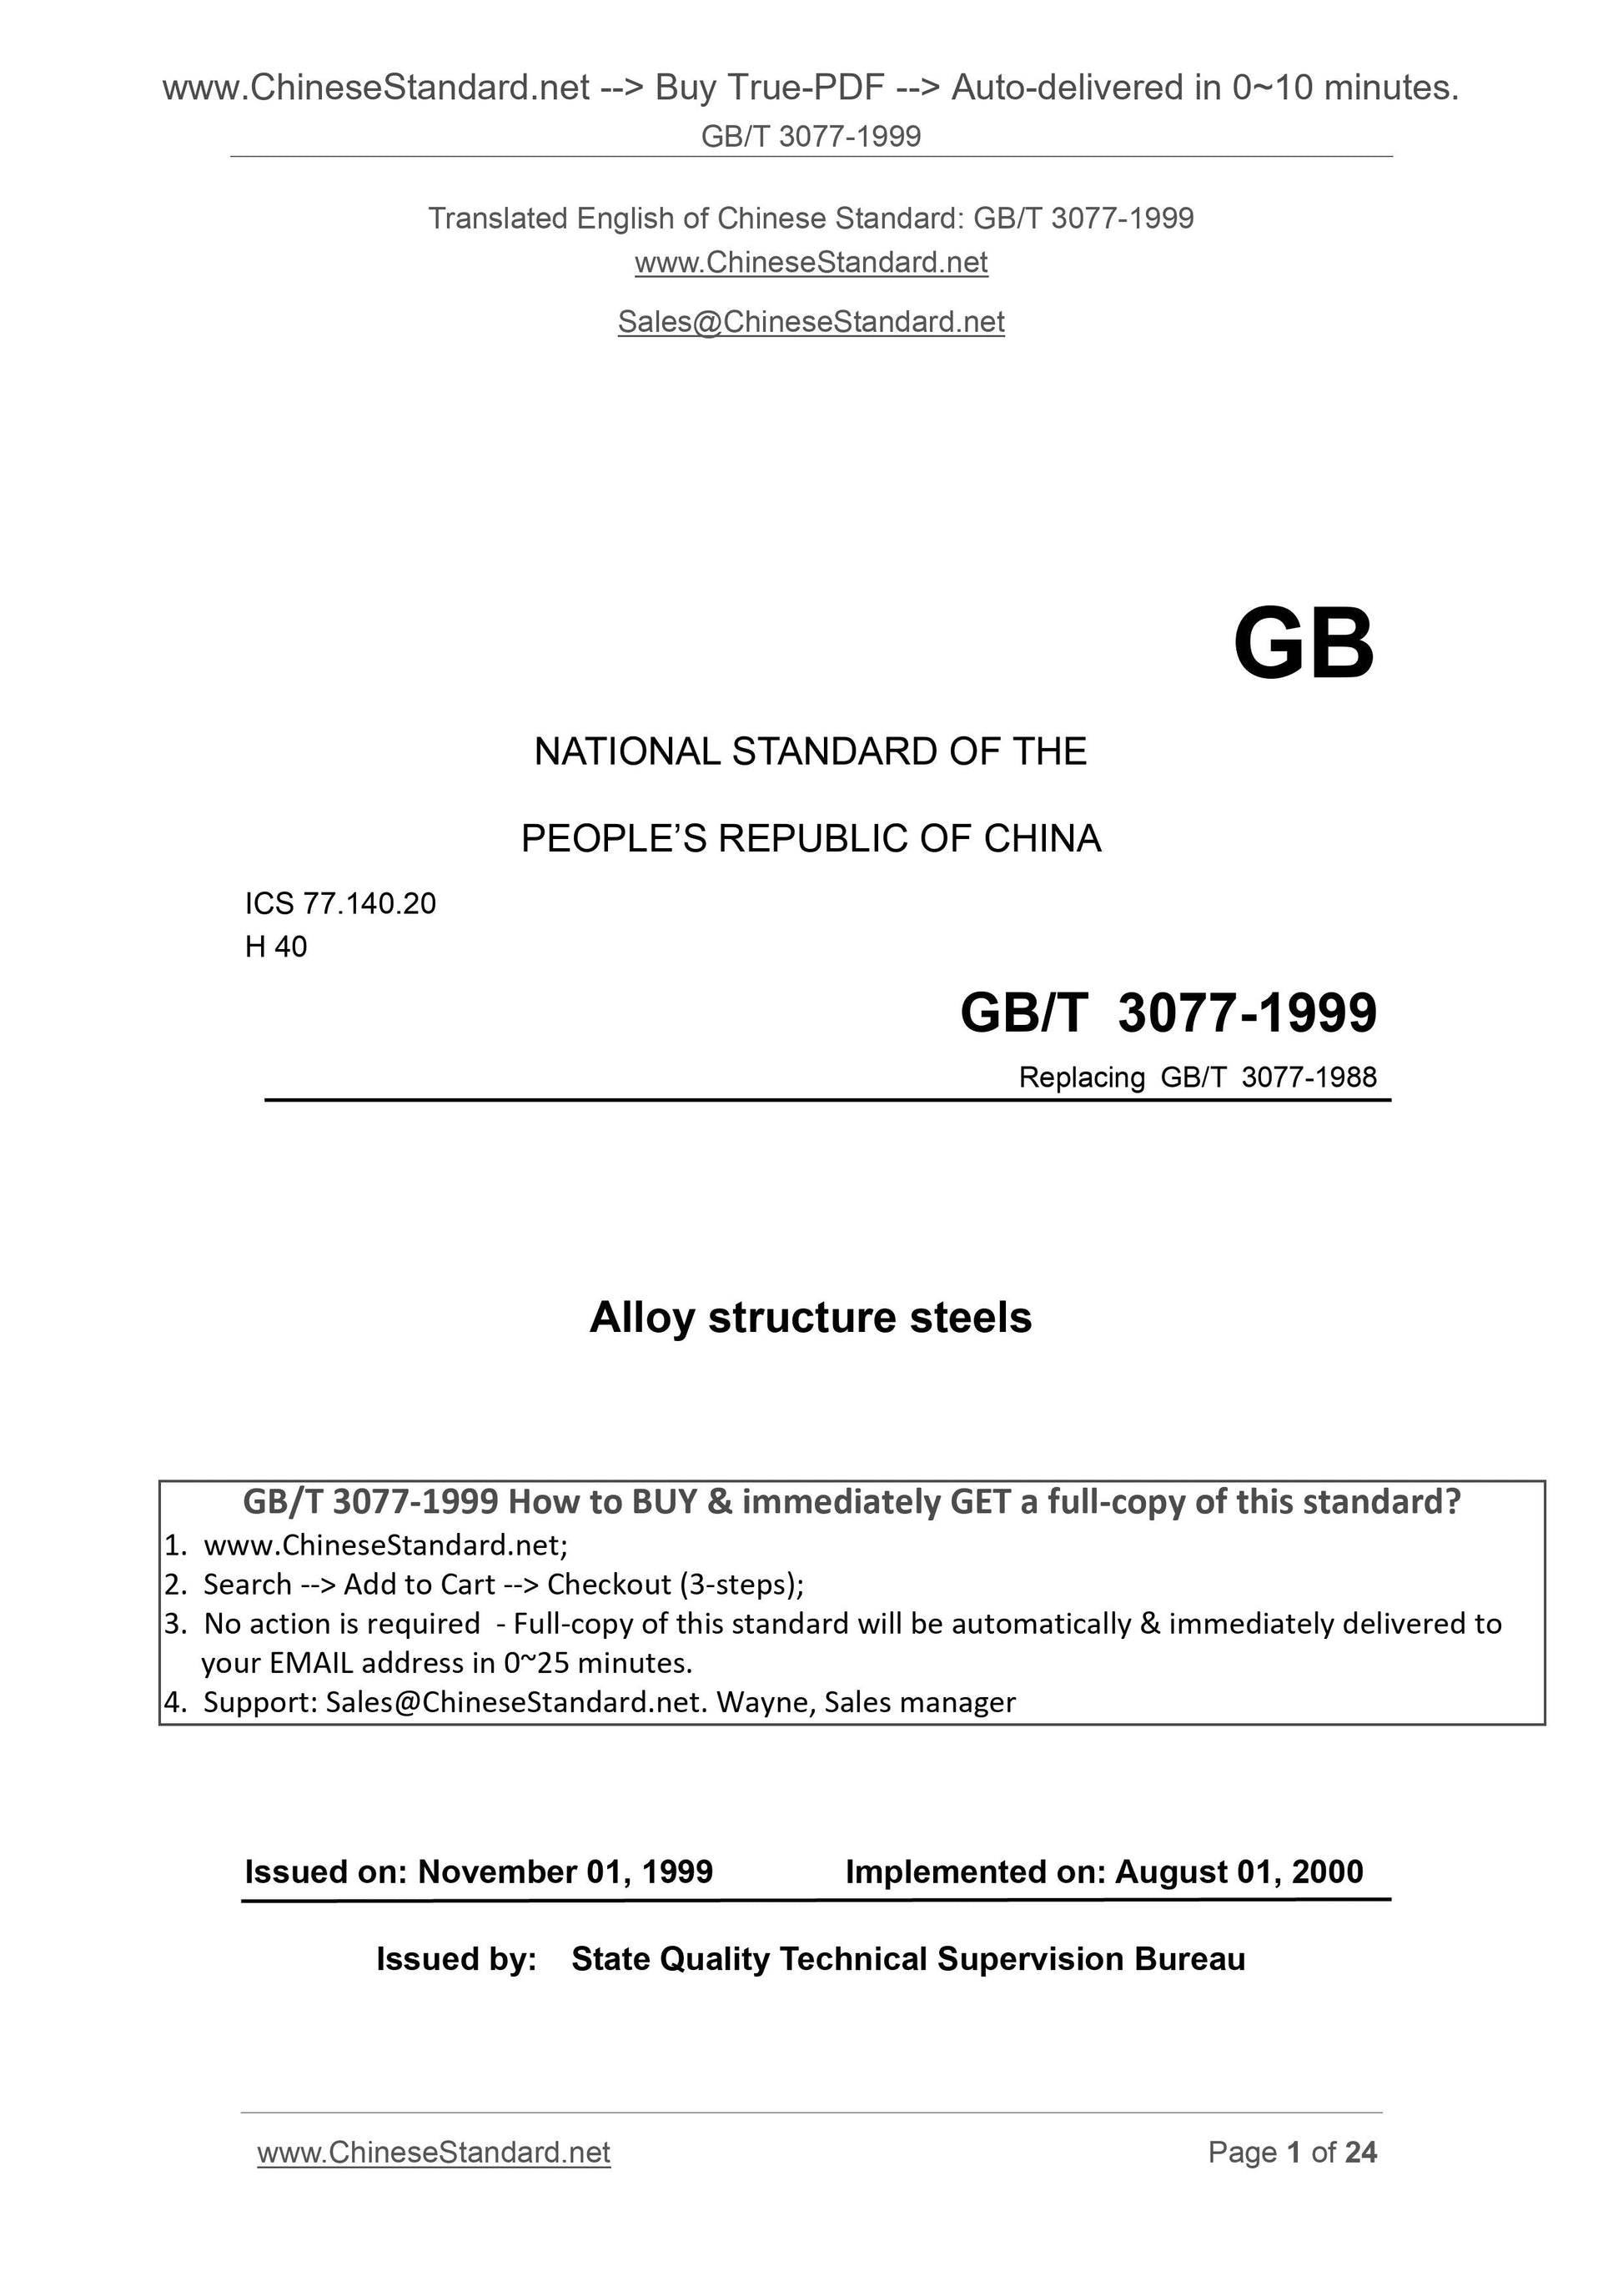 GB/T 3077-1999 Page 1